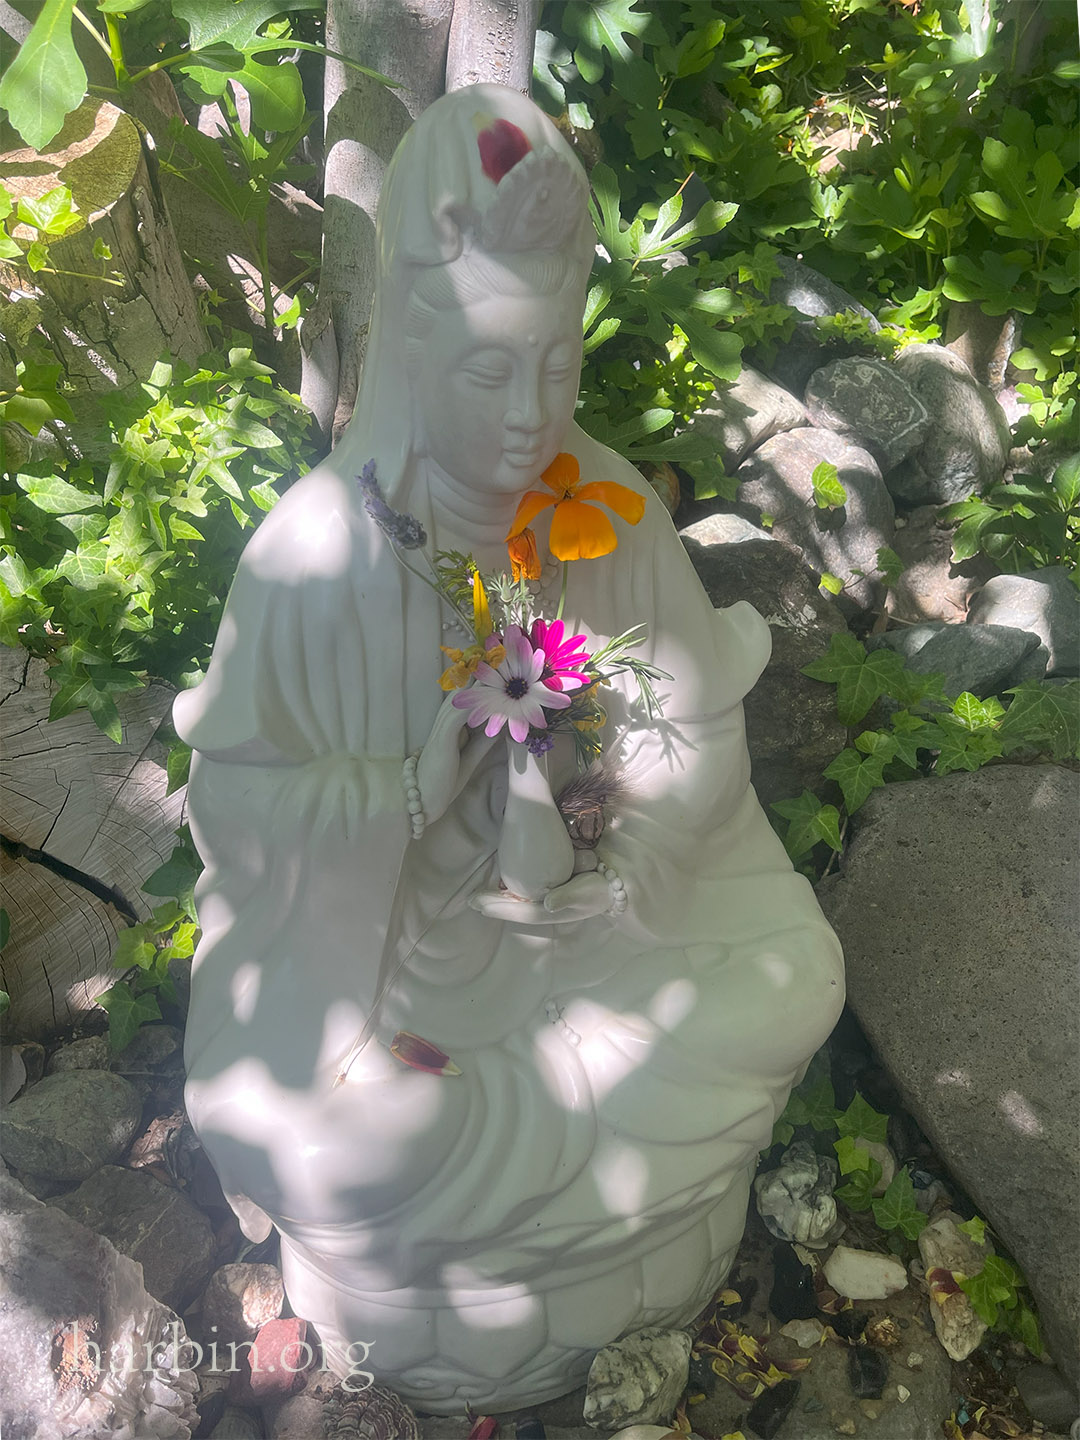 A Quan Yin statue sits in the shade of an fig tree holding flowers in a vase.